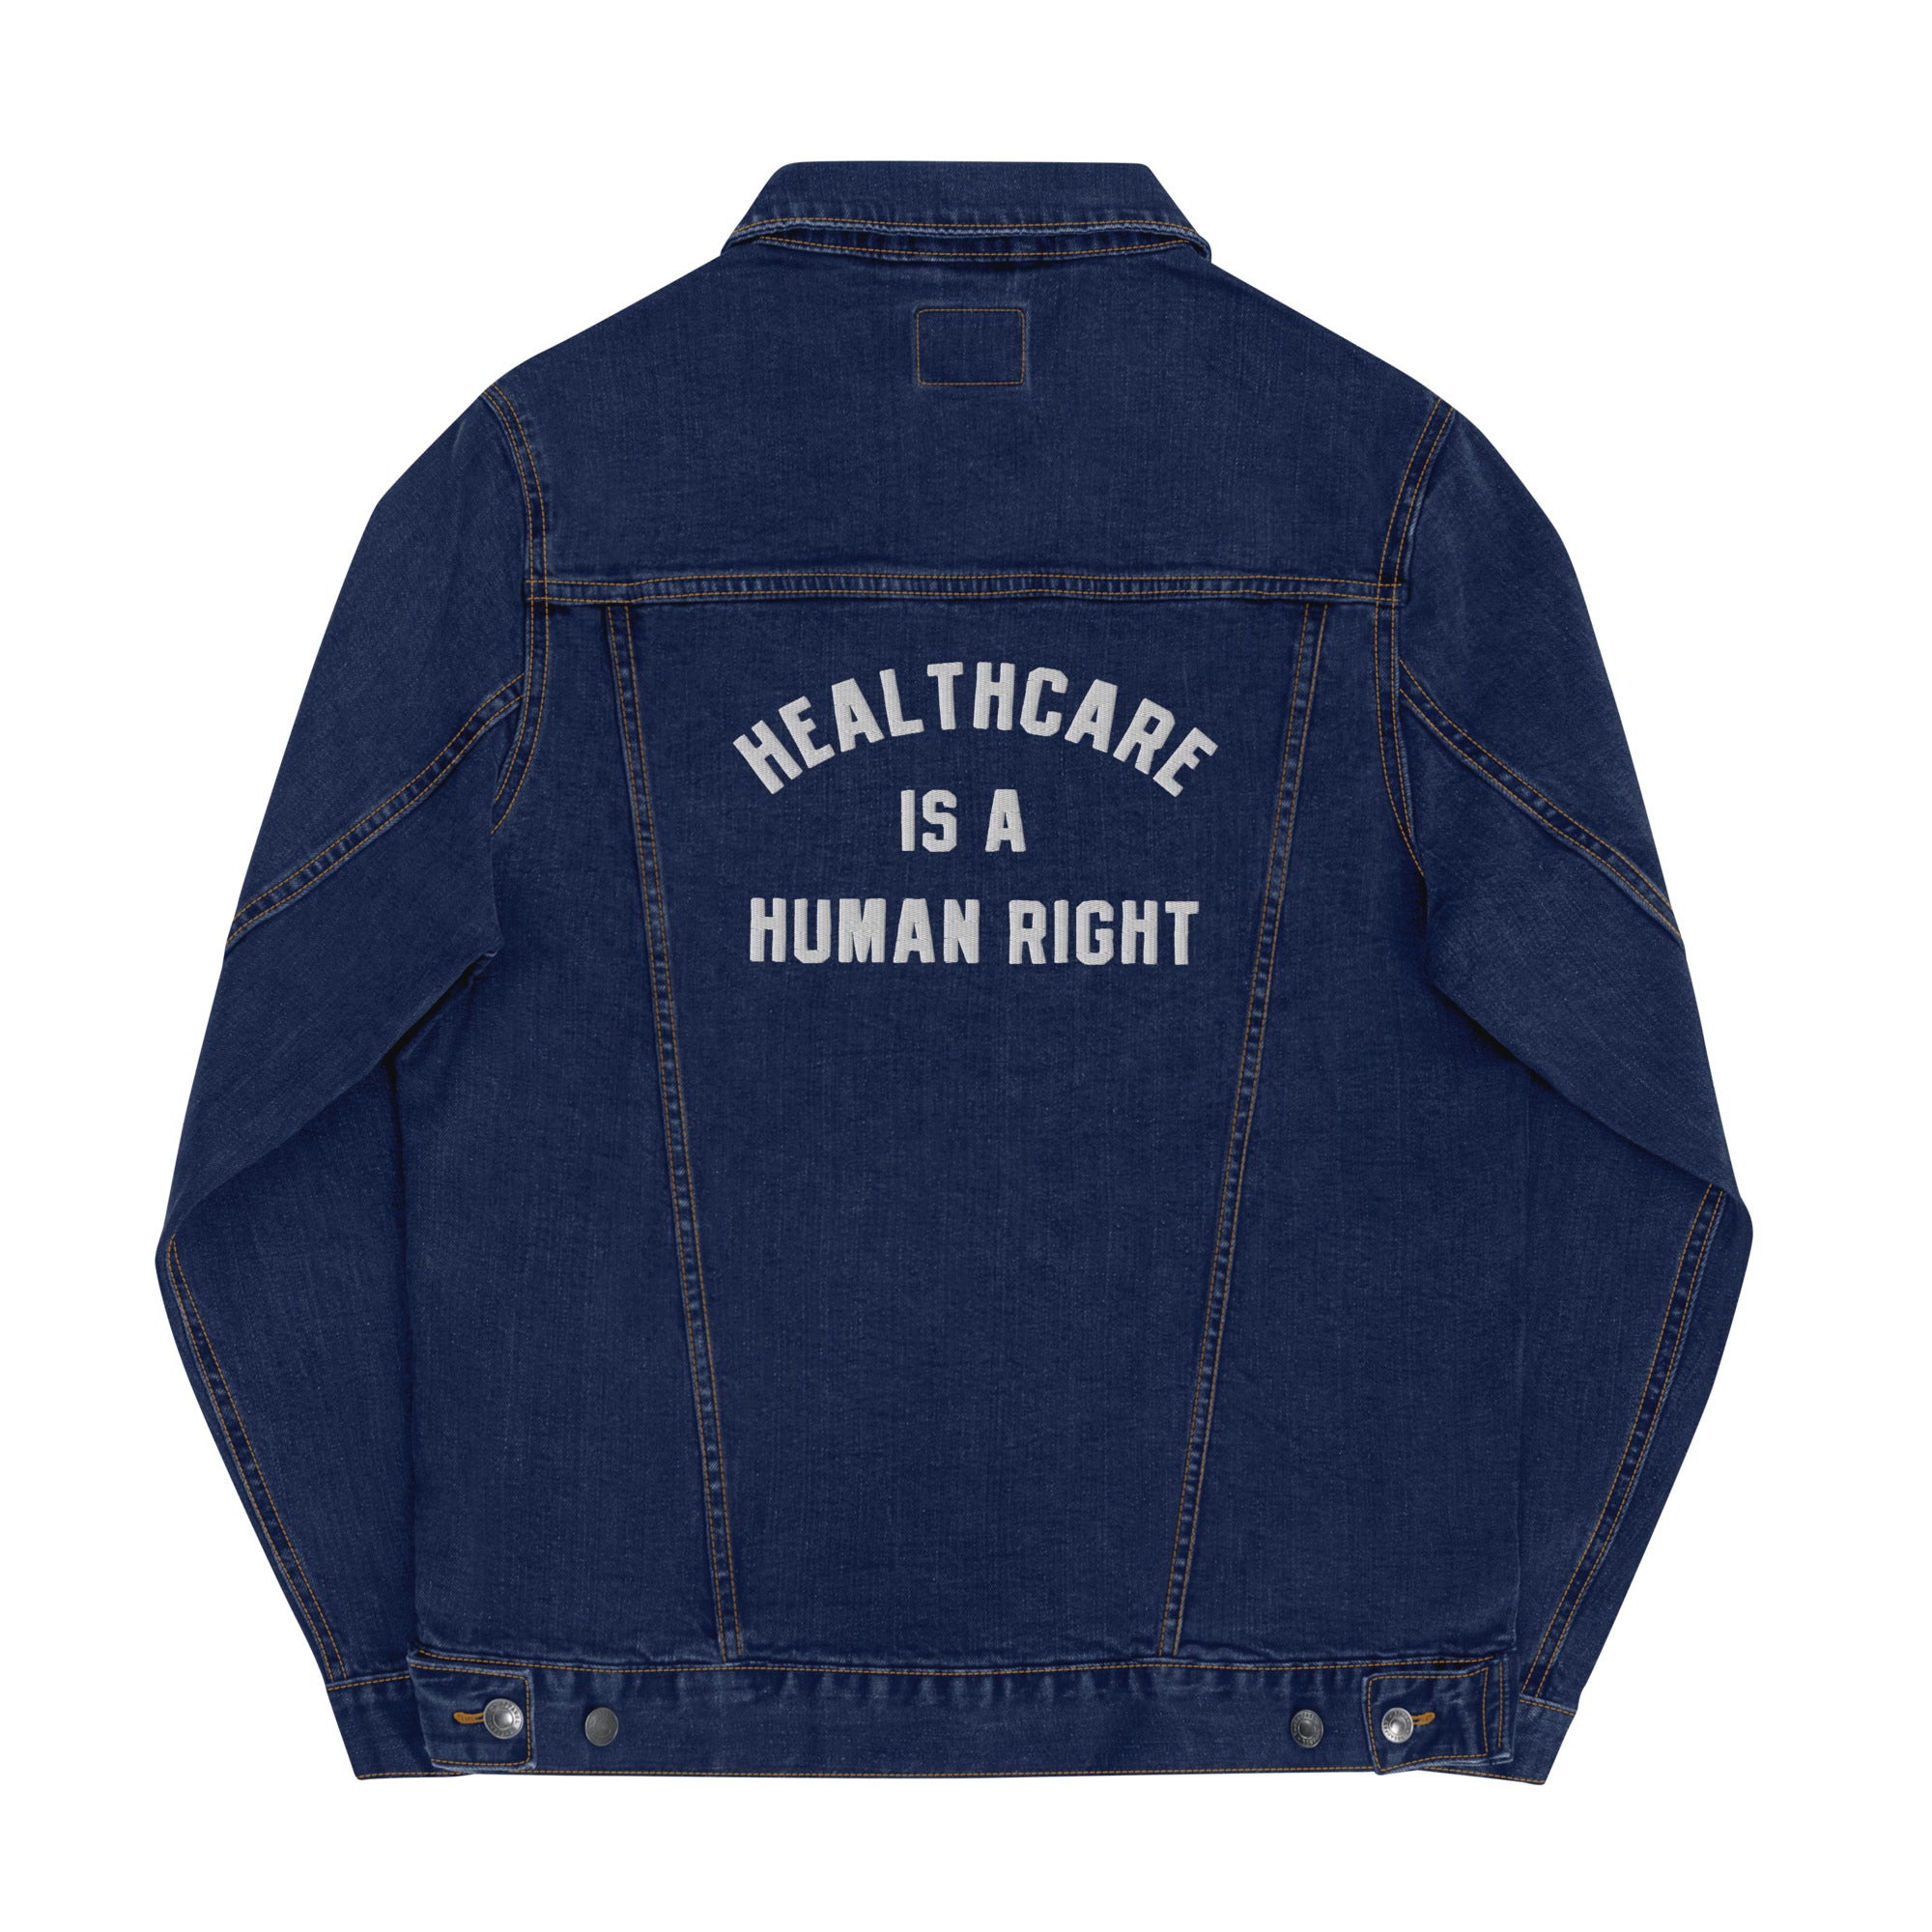 Healthcare is a Human Right Denim Jacket